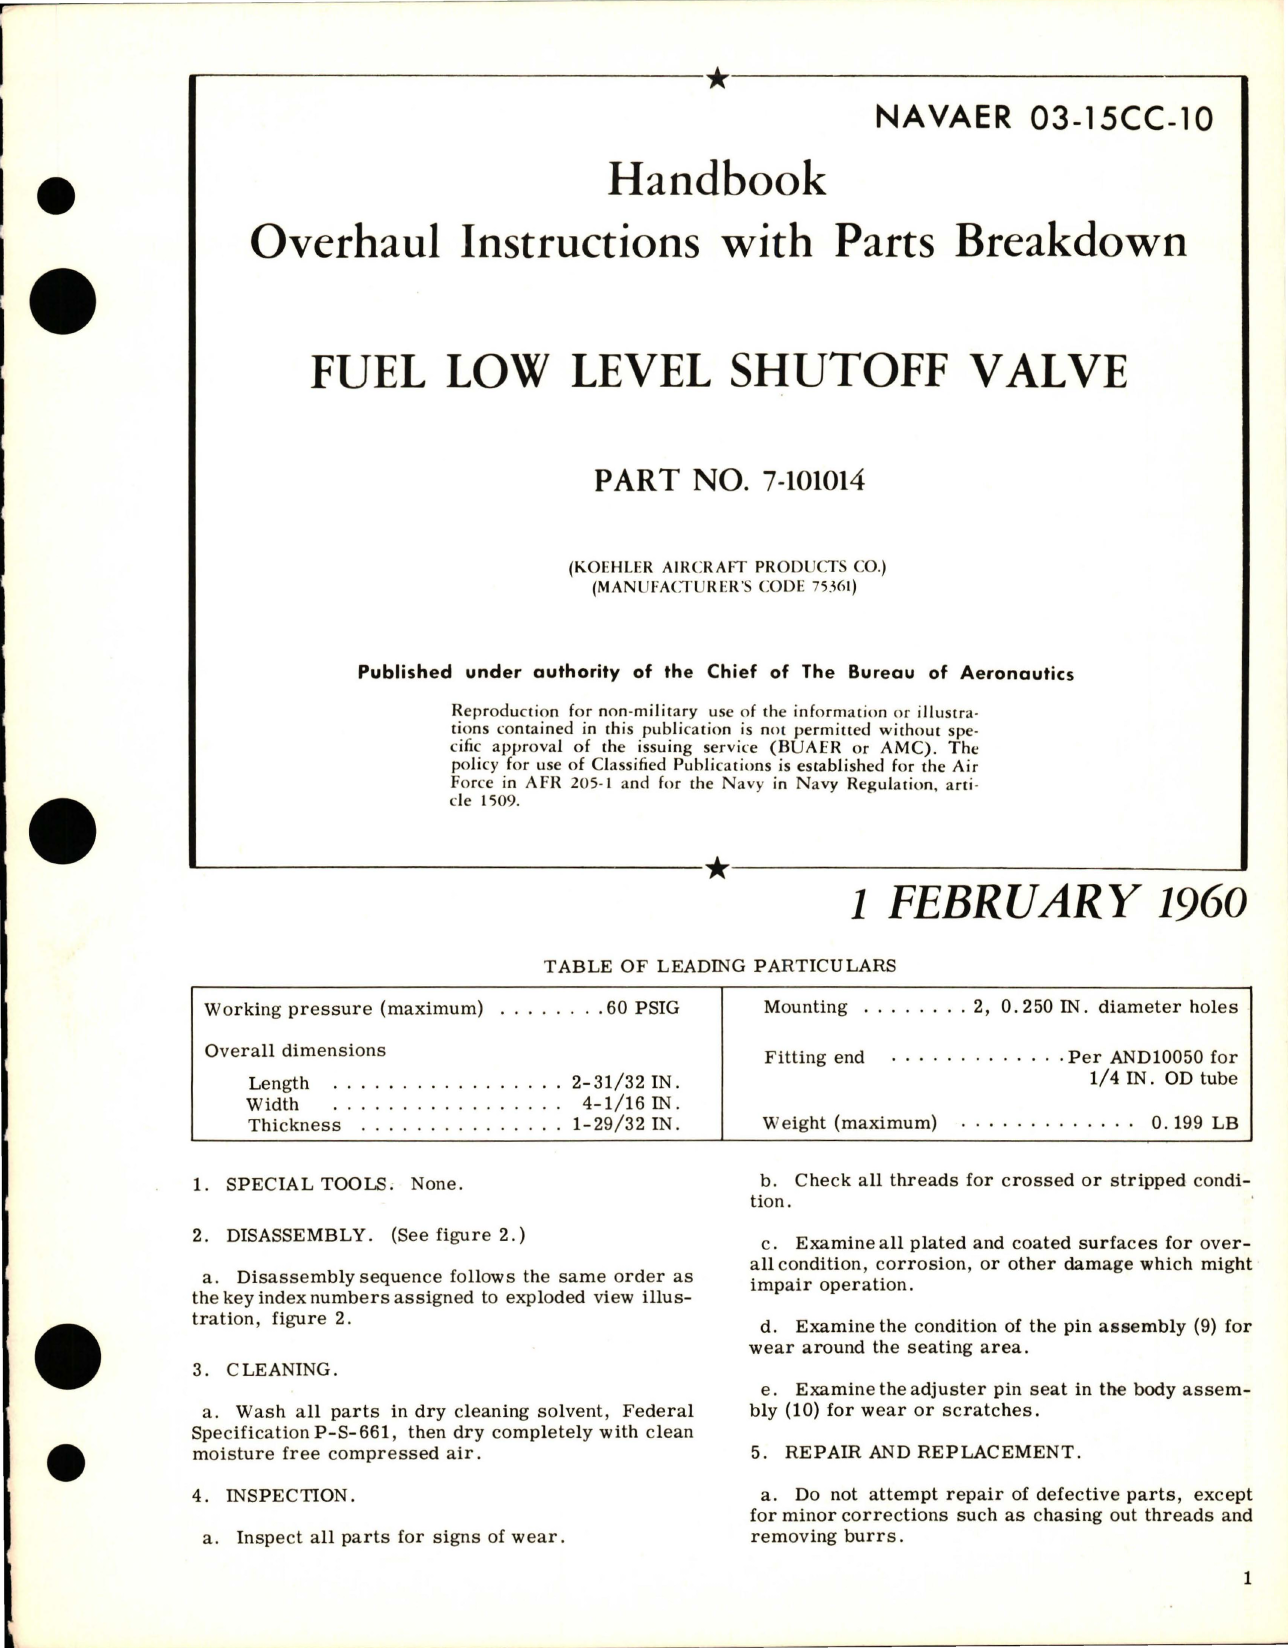 Sample page 1 from AirCorps Library document: Overhaul Instructions with Parts Breakdown for Fuel Low Level Shutoff Valve - Part 7-101014